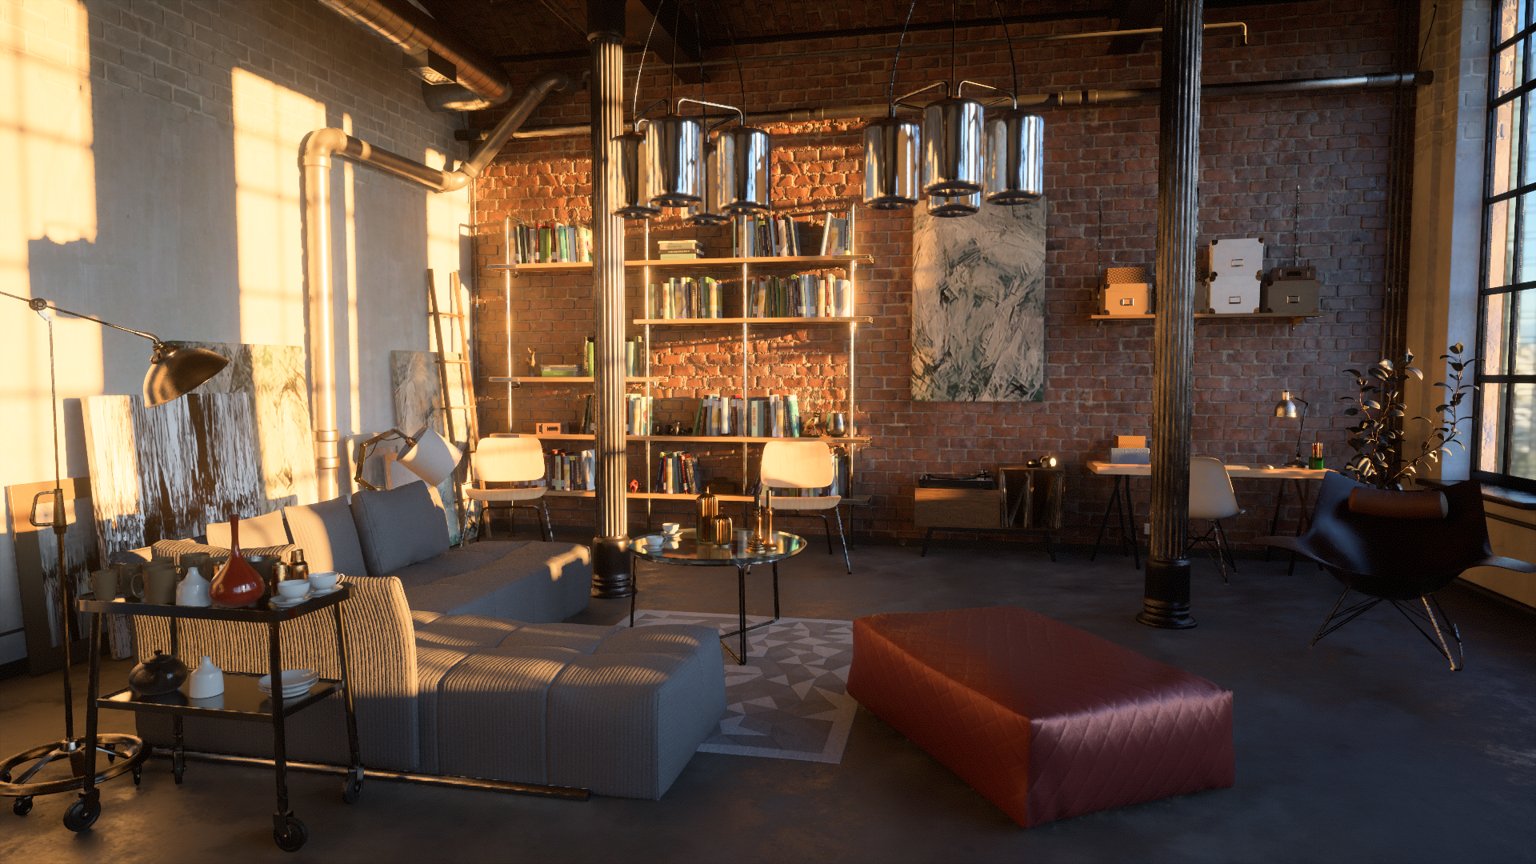 A rendering of a fancy loft apartment